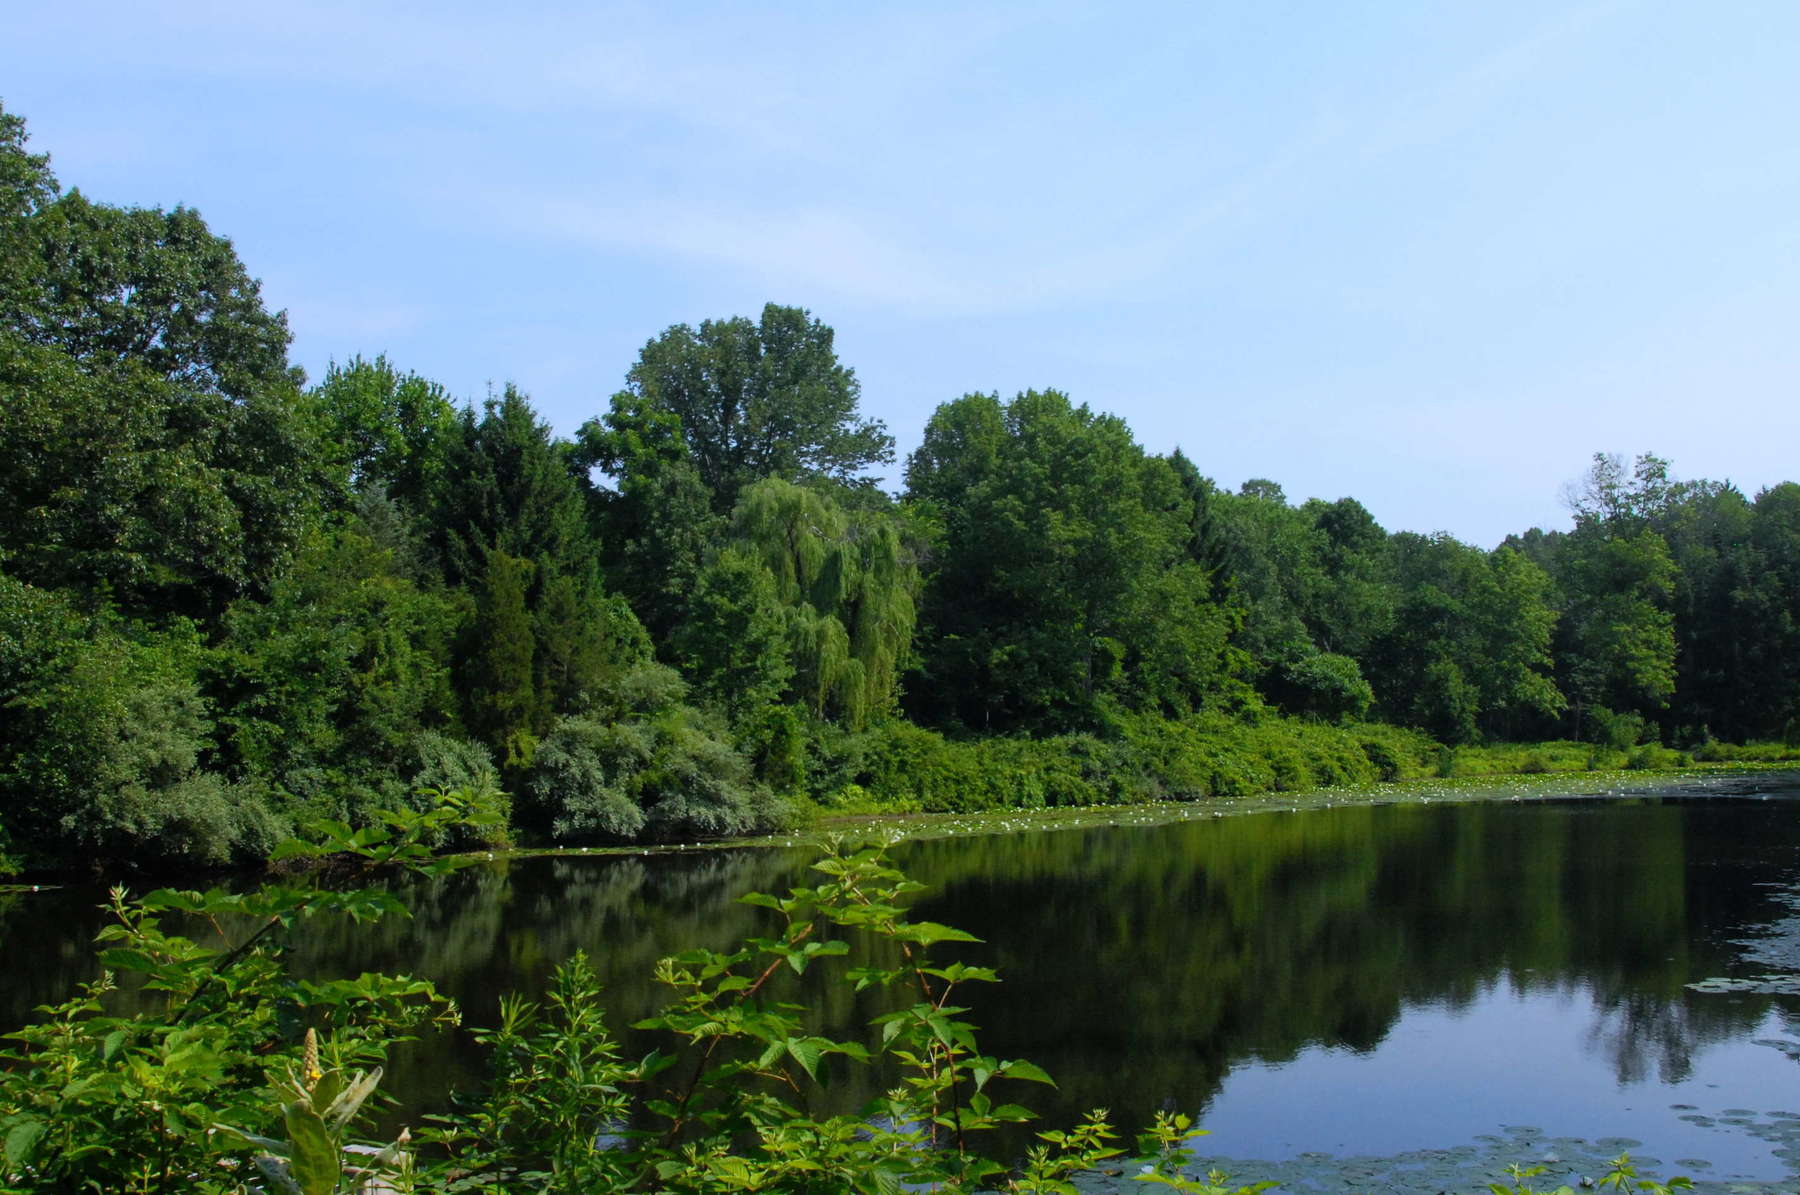 A view of Woodfield Reservation's wetlands, trees, and shrubs.